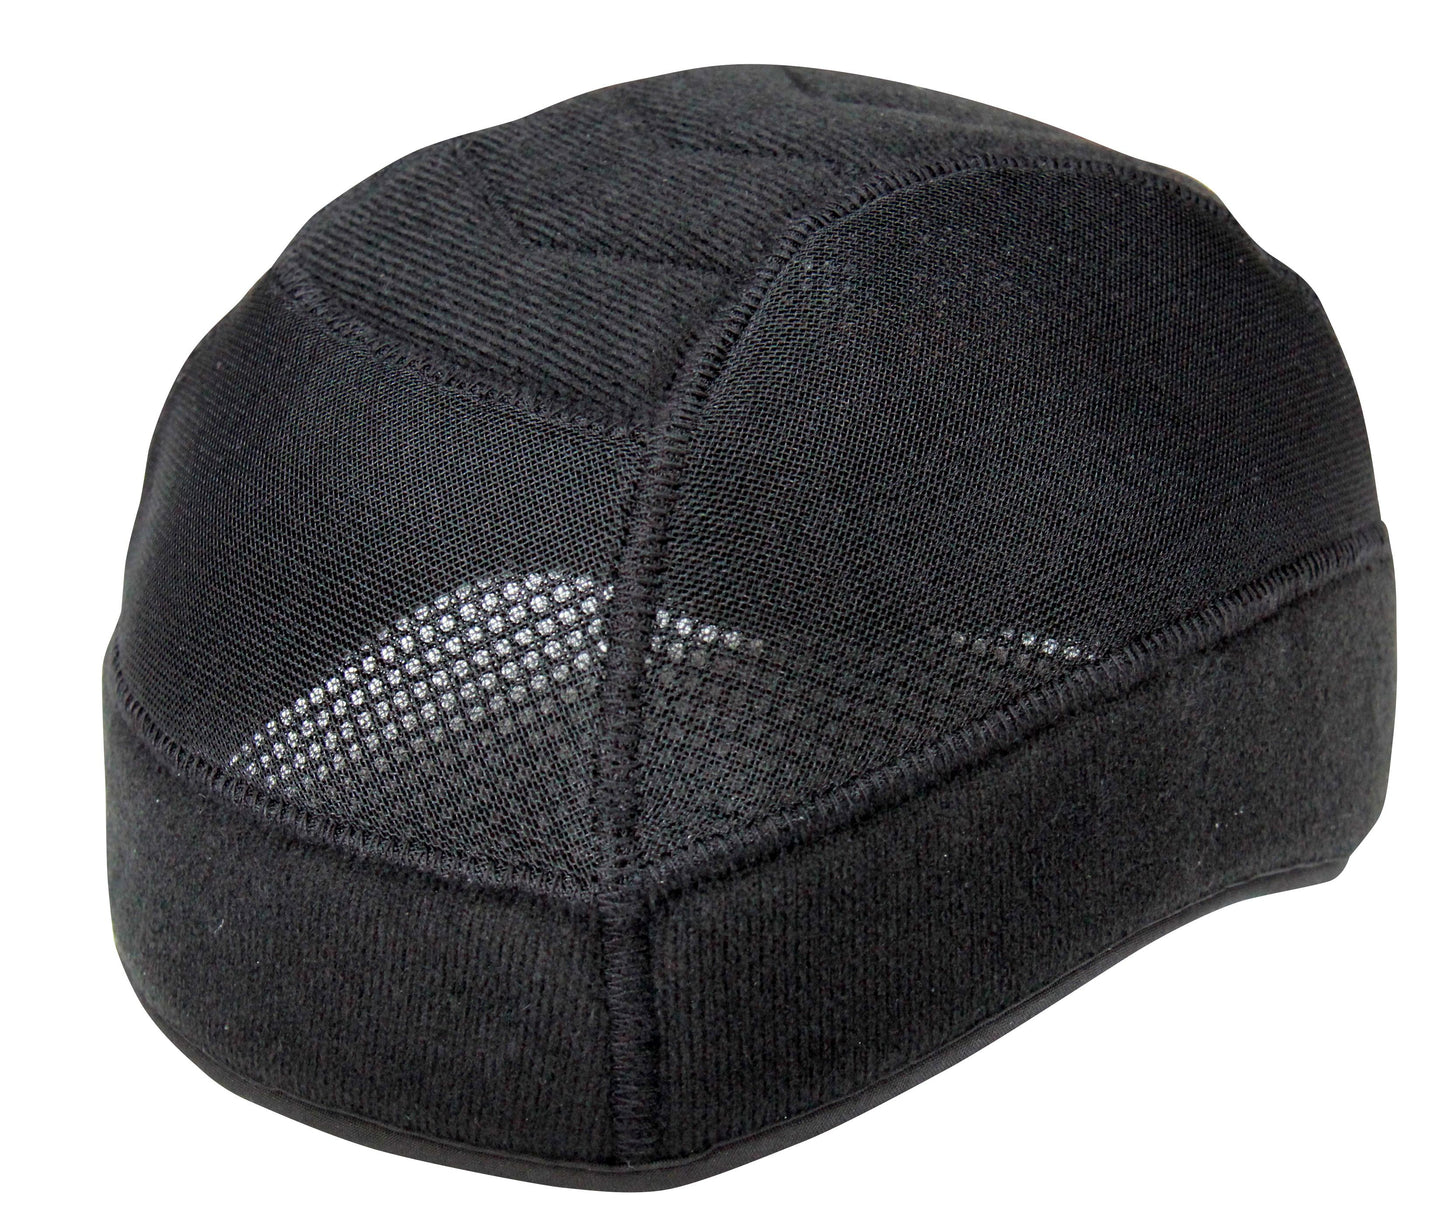 Replacement Liner for Tipperary WINDSOR helmet